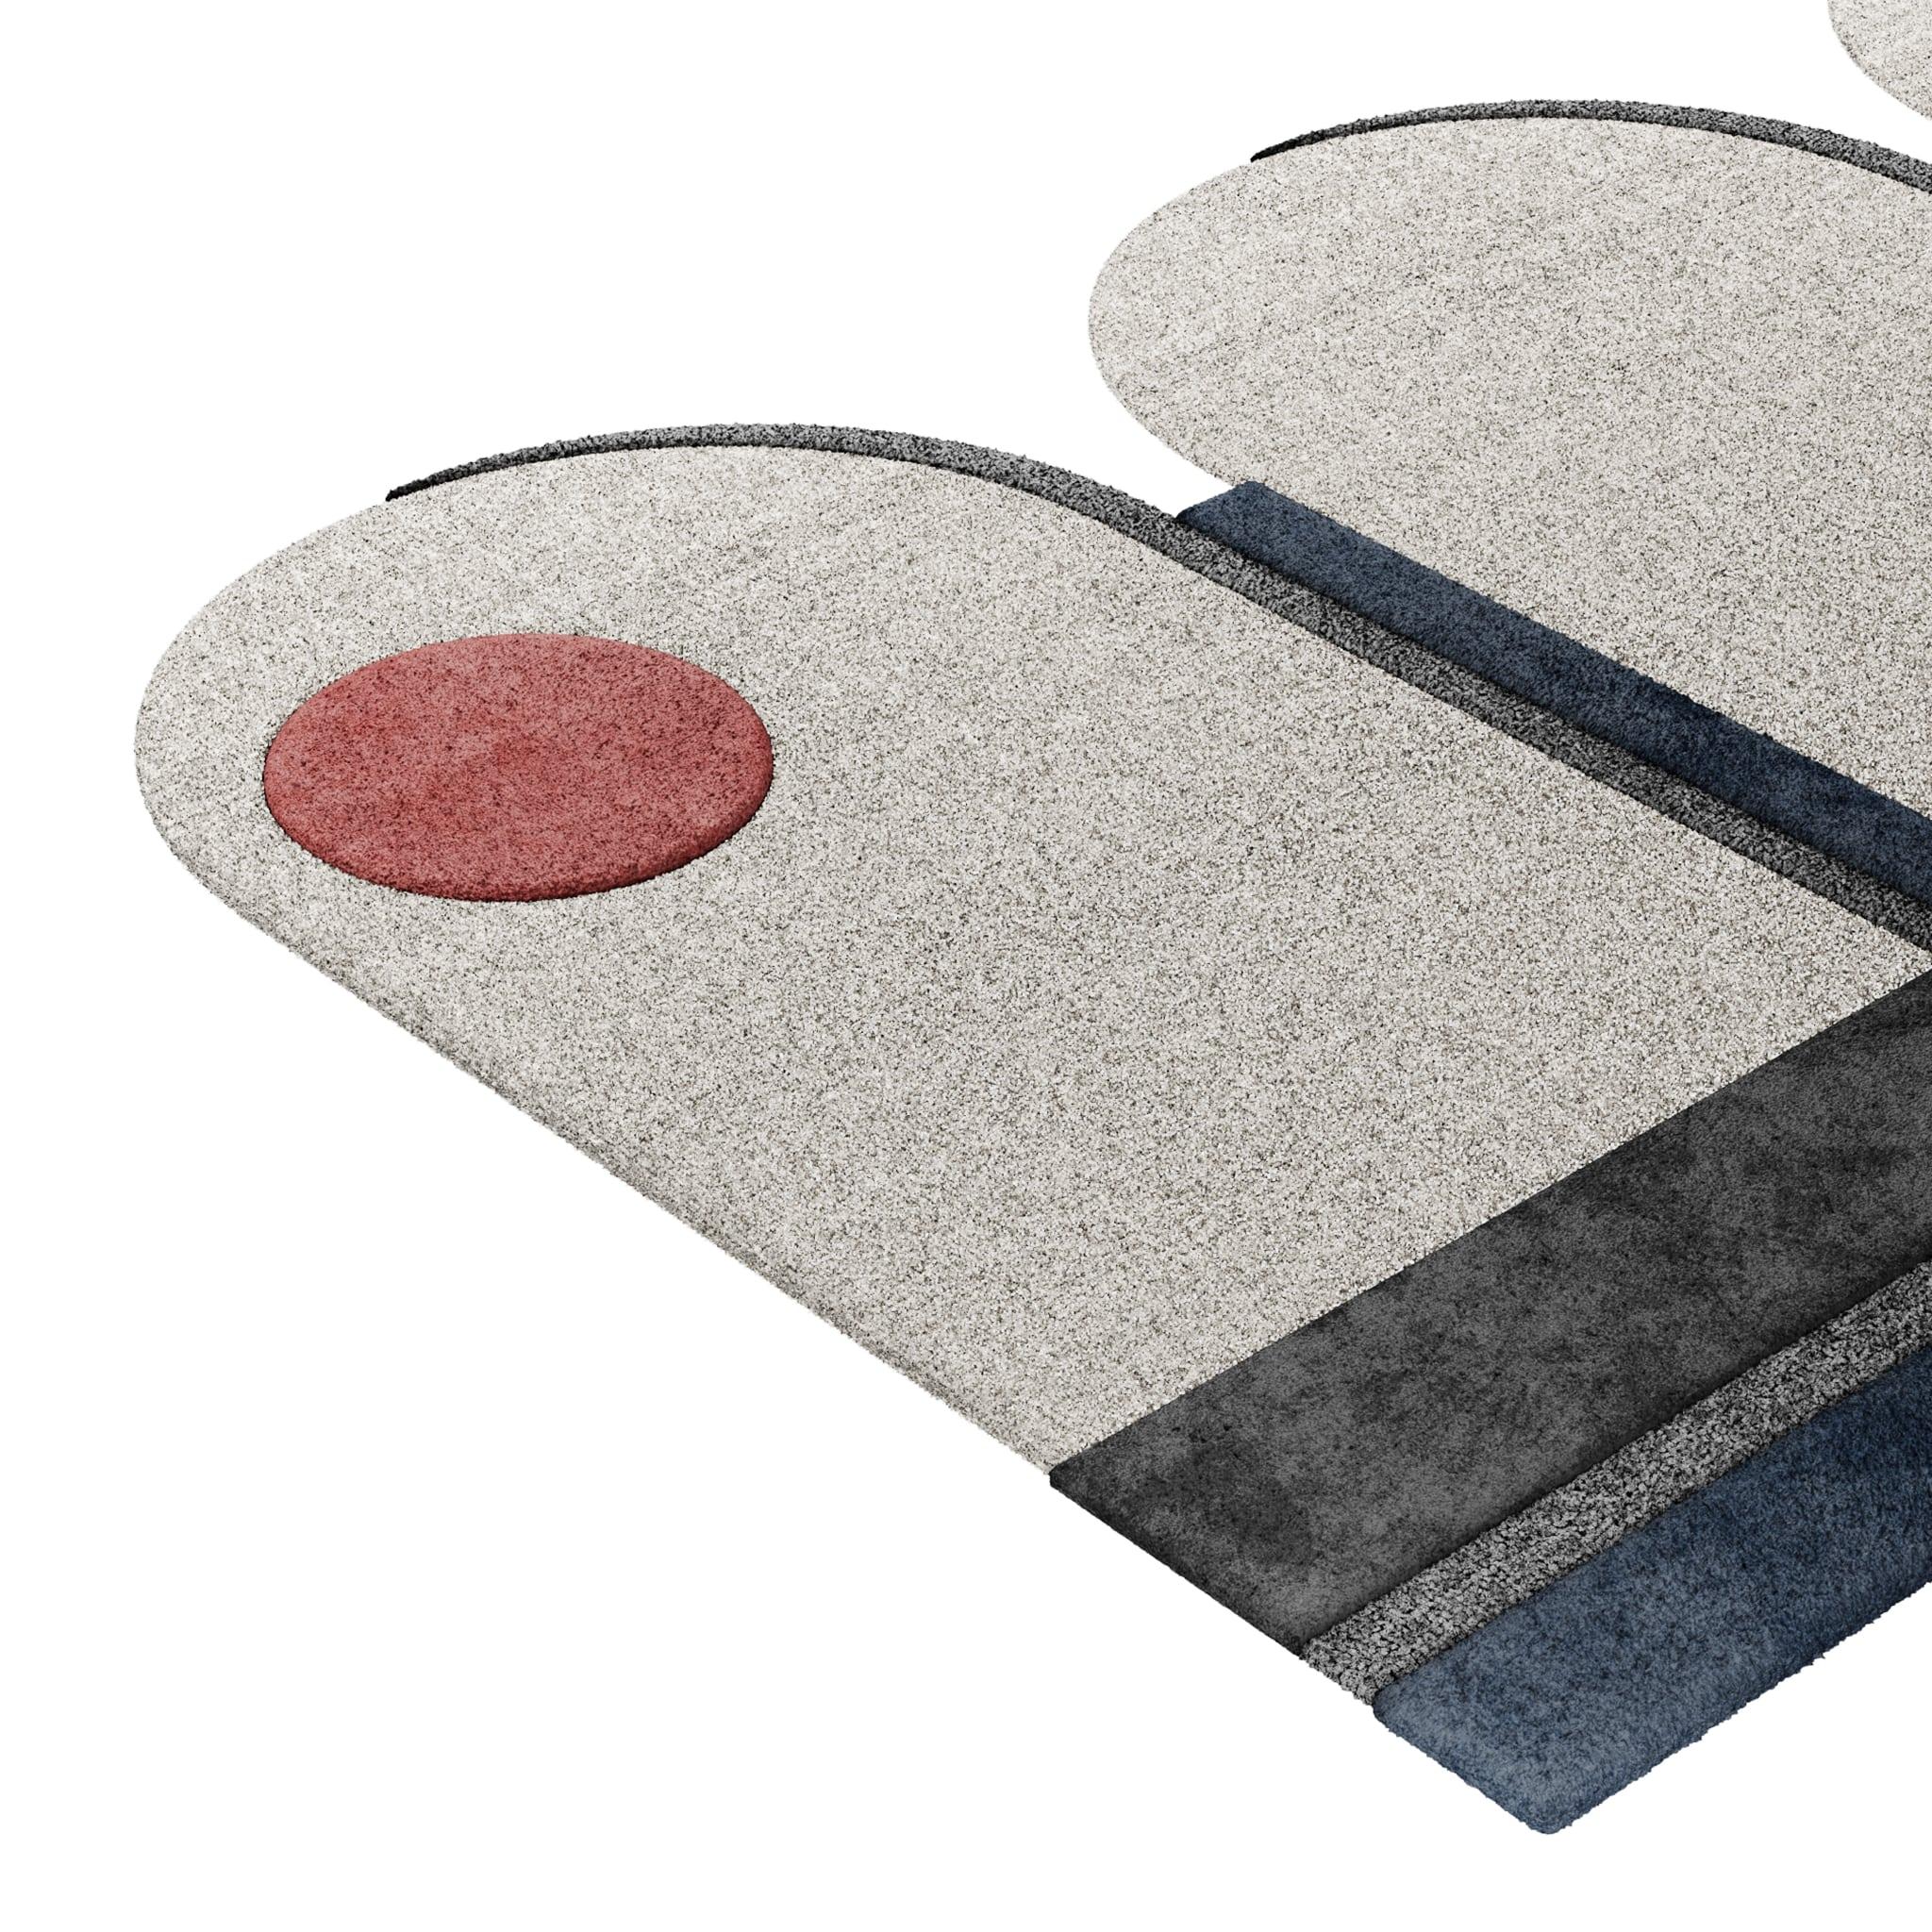 Tapis Retro #017 is a retro rug with an irregular shape and timeless colors. Inspired by architectural lines, this geometric rug makes a statement in any living space. 

Using a 3D-tufted technique that combines cut and loop pile, the retro rug in